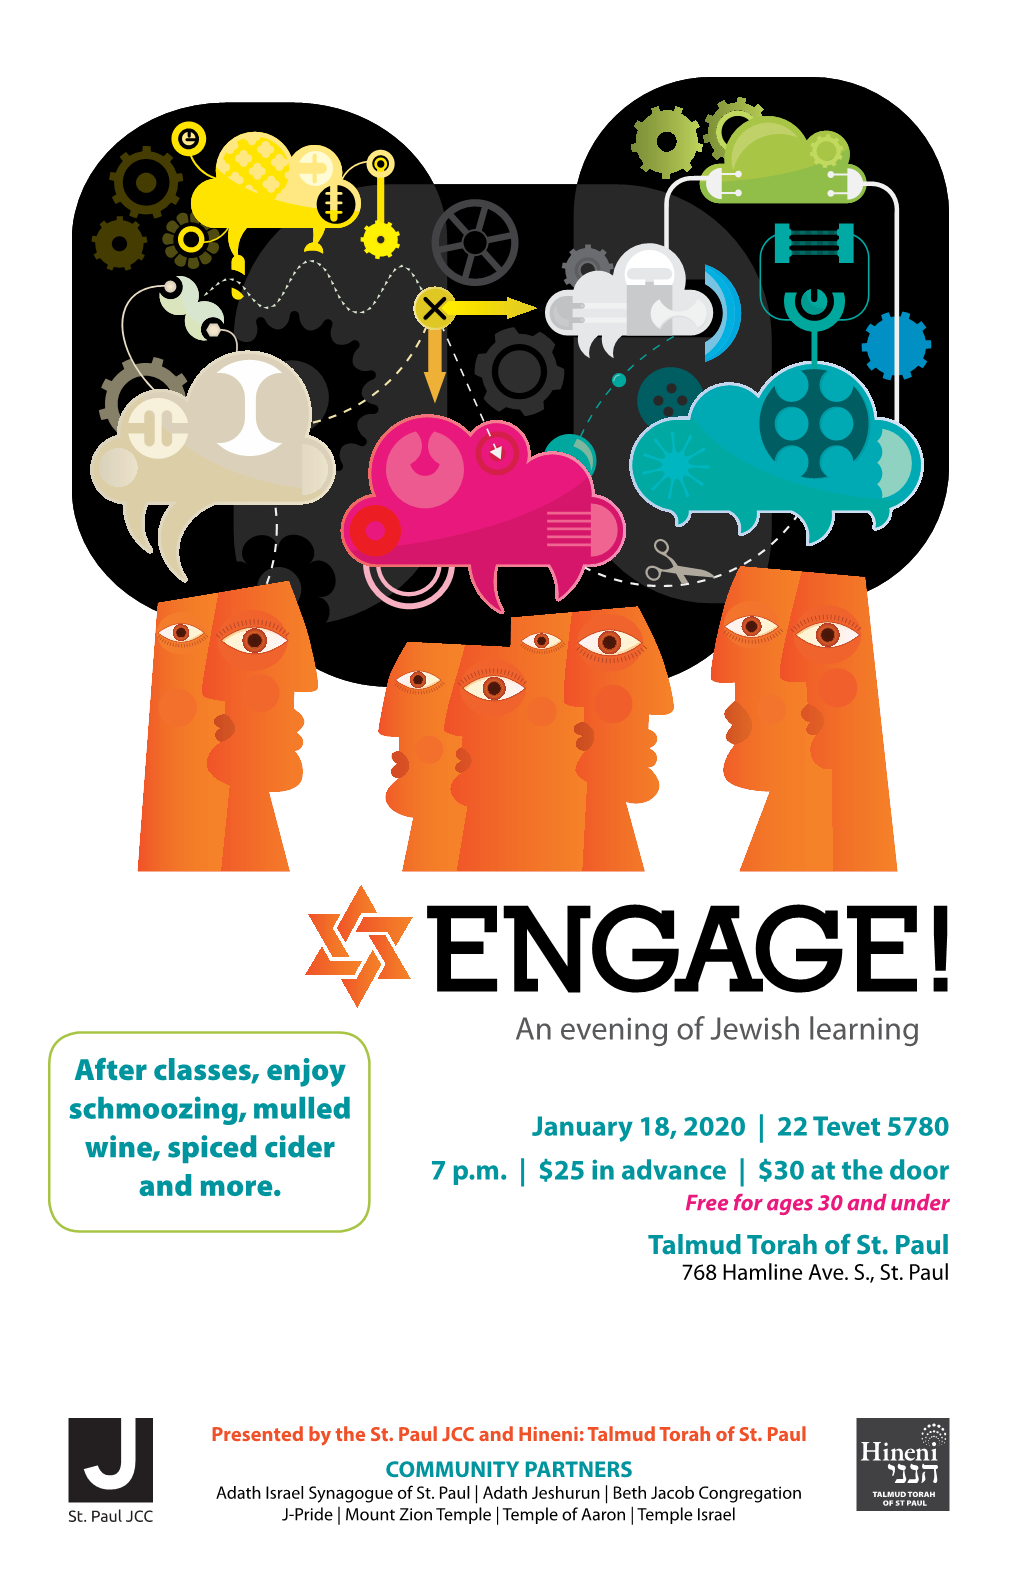 An Evening of Jewish Learning After Classes, Enjoy Schmoozing, Mulled